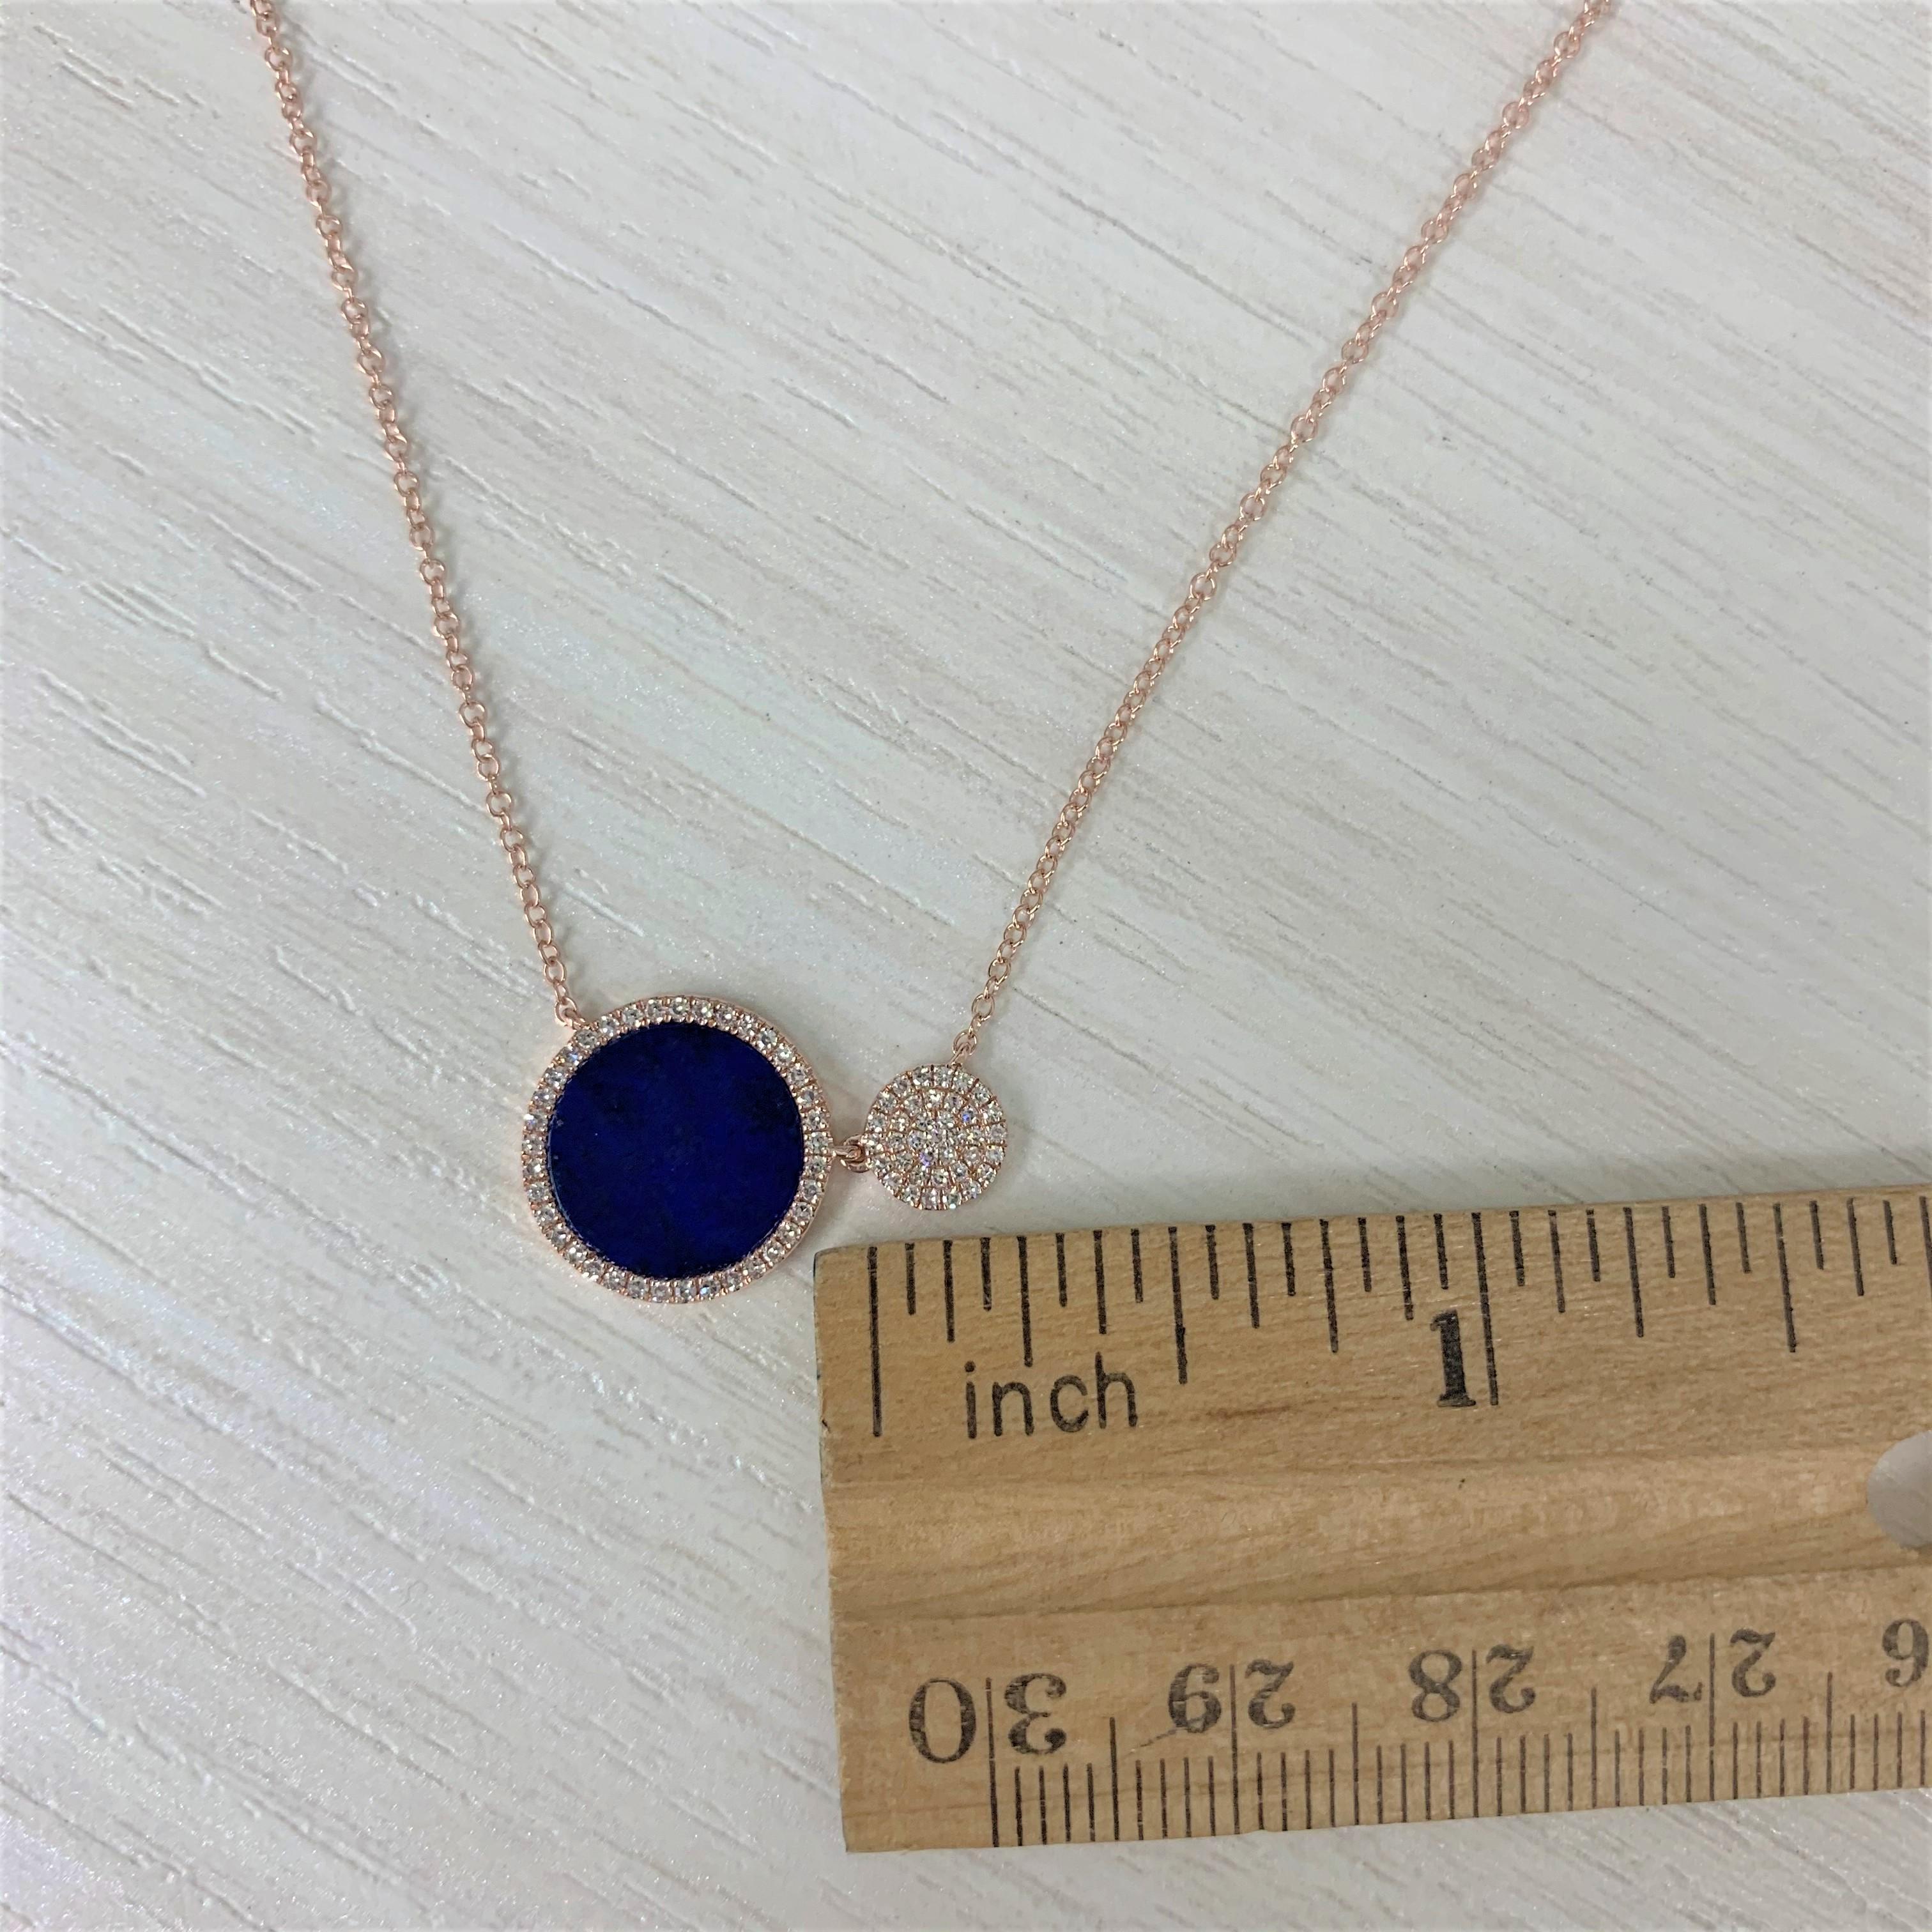 14 Karat Rose Gold 0.22 Carat Diamond & Lapis Pendant Necklace In New Condition For Sale In Great neck, NY